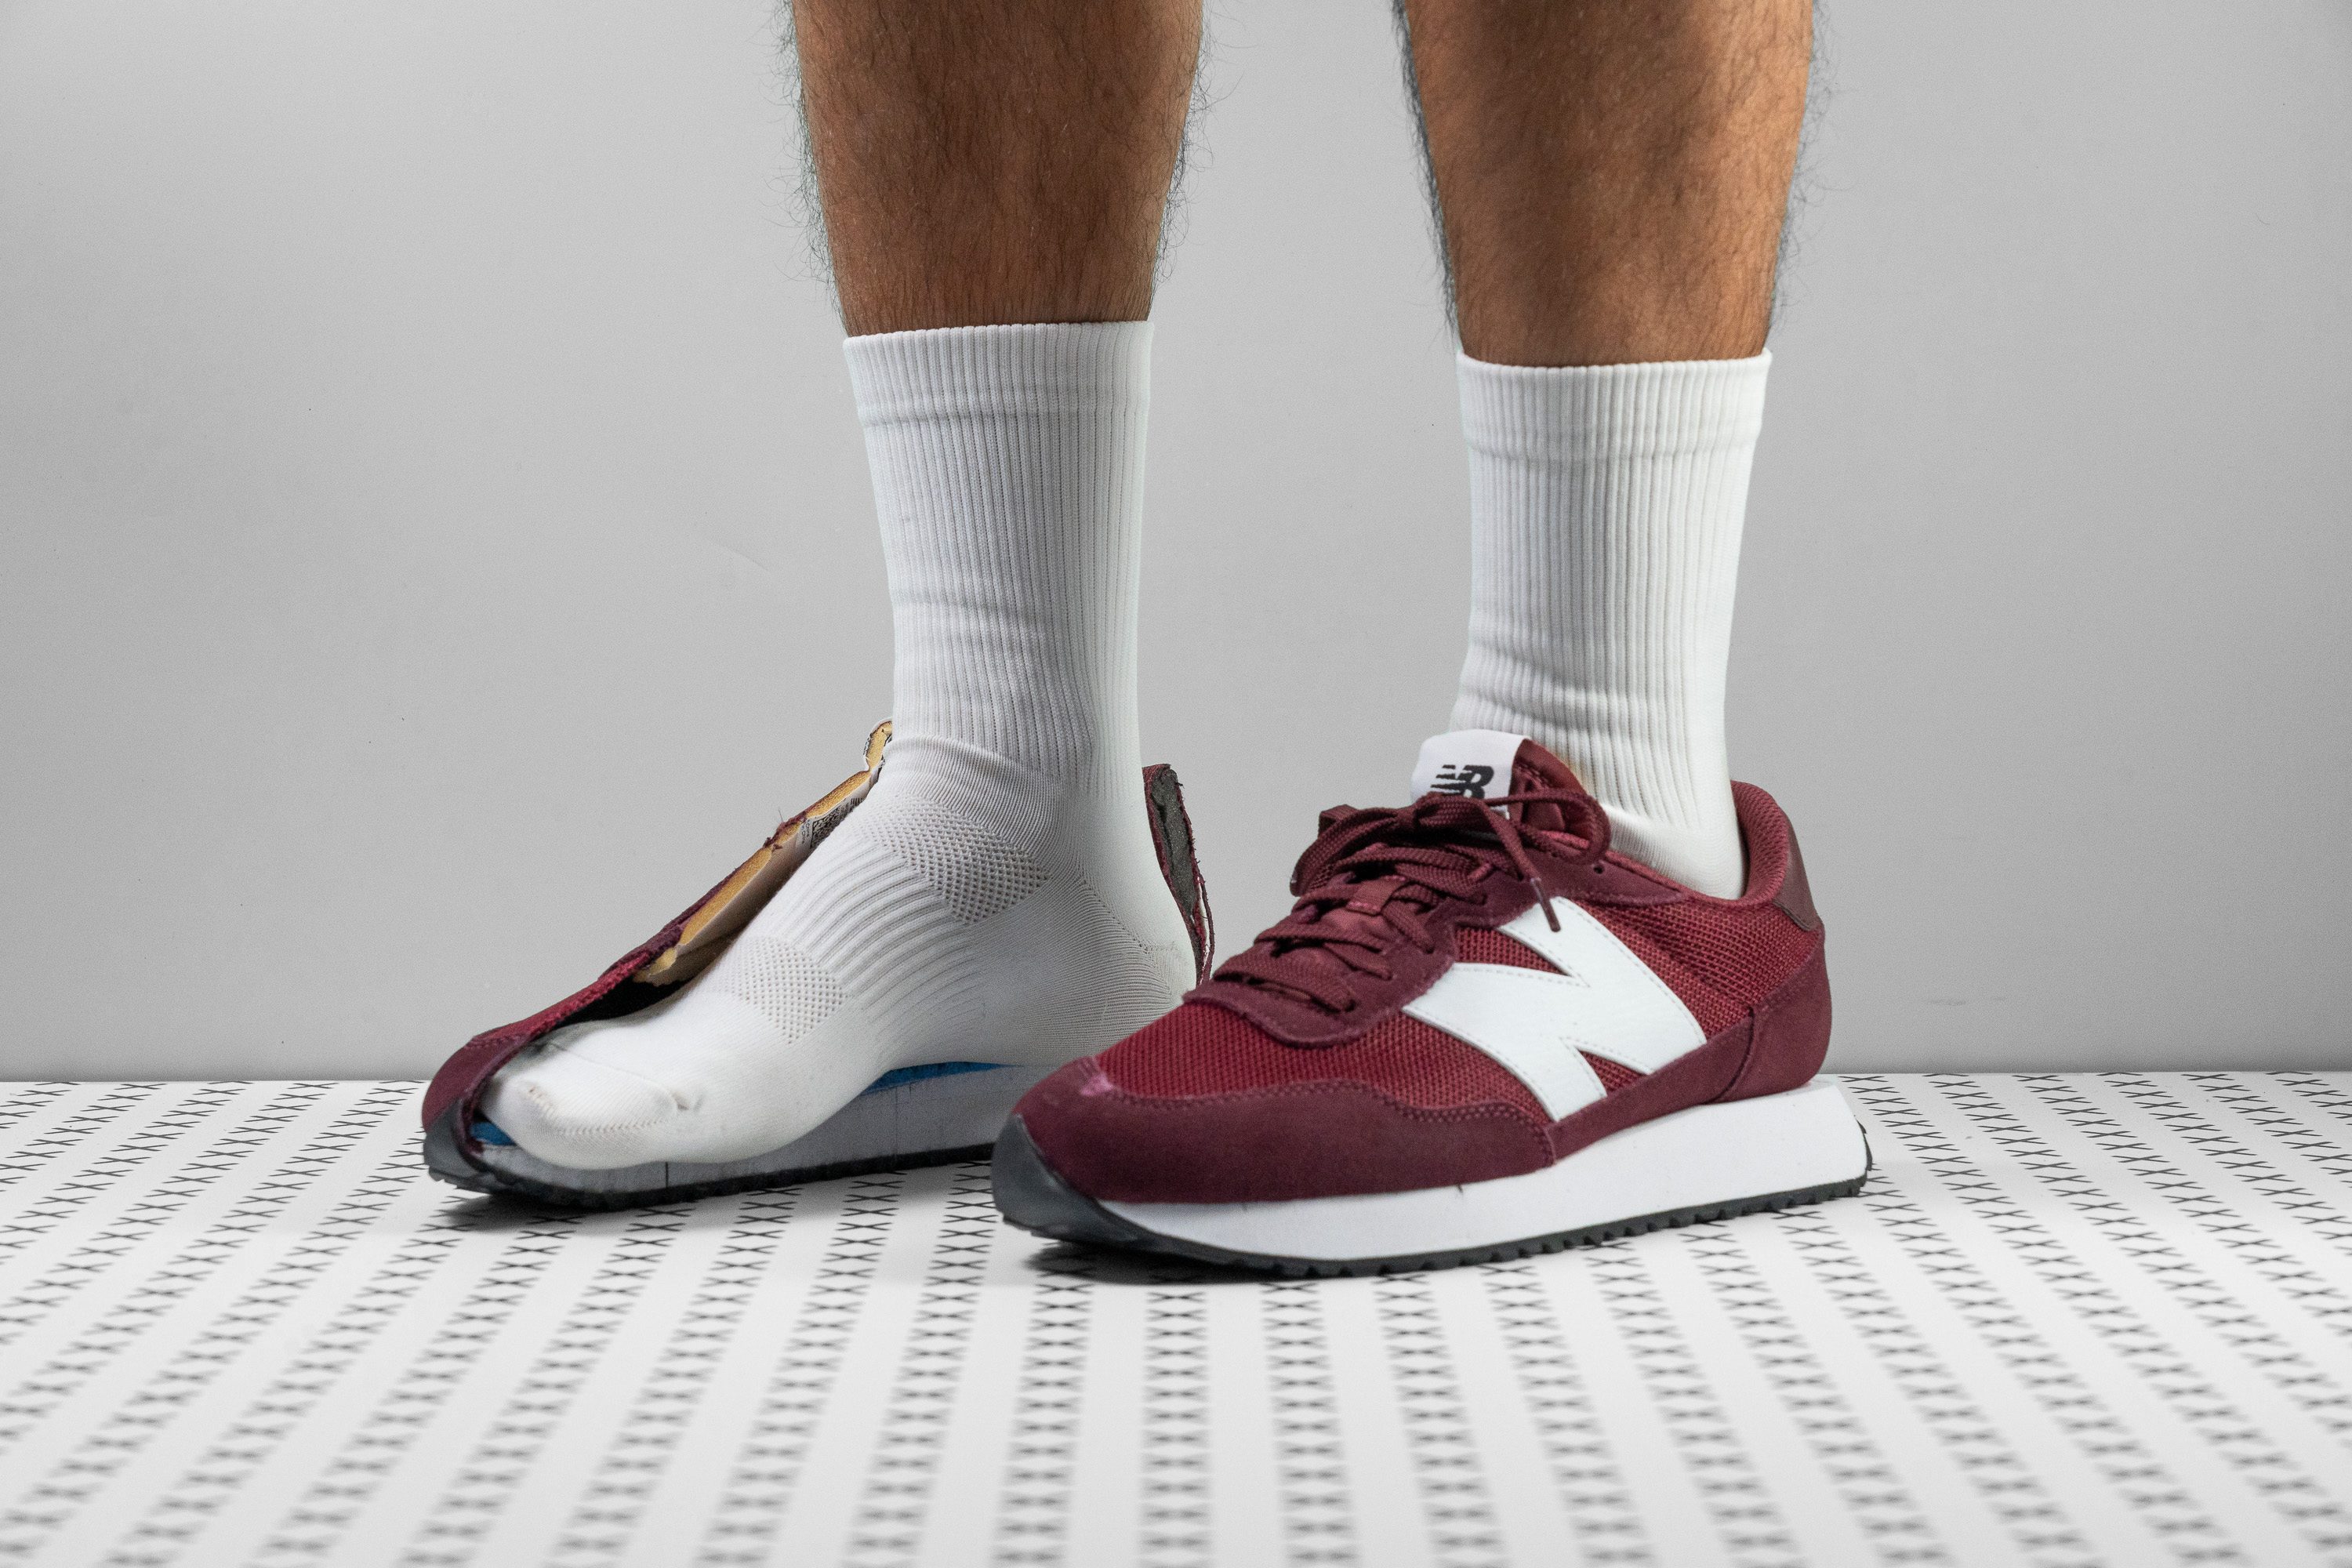 These New Versions Of The New Balance 247 Opt For More Of A Sporty Look •